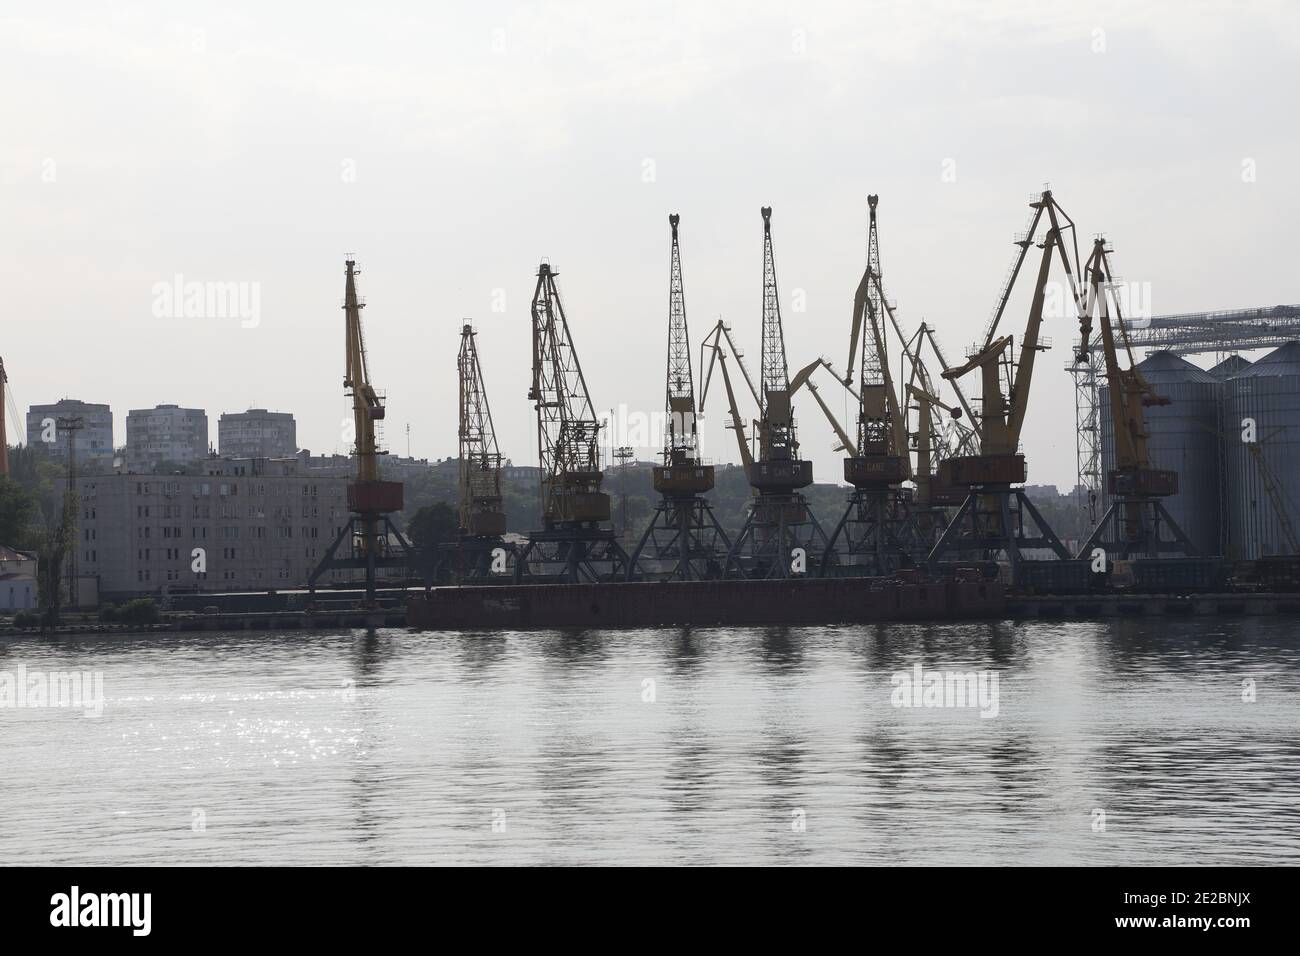 A row of harbor cranes in the port of Odessa, Ukraine, at the Black Sea; reflections in the water. Stock Photo